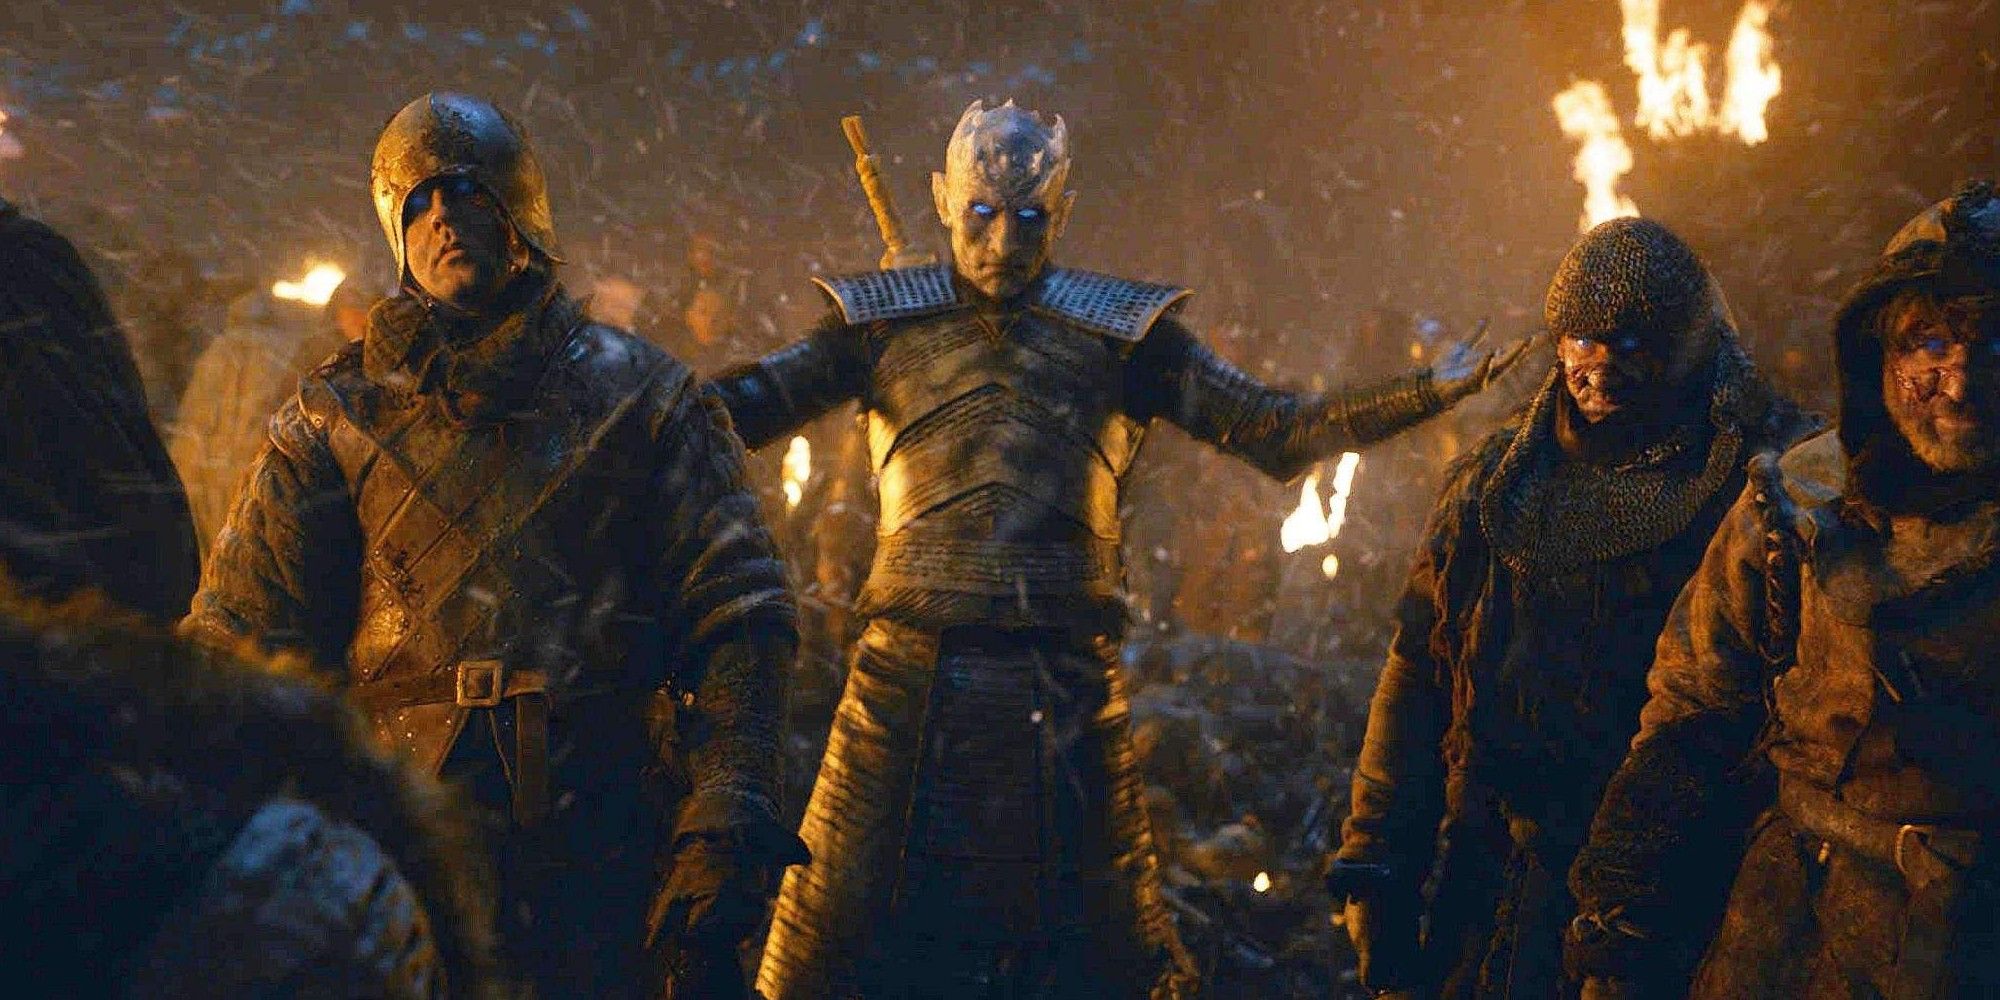 The Night King raises corpses in Game of Thrones season 8, episode 3, 